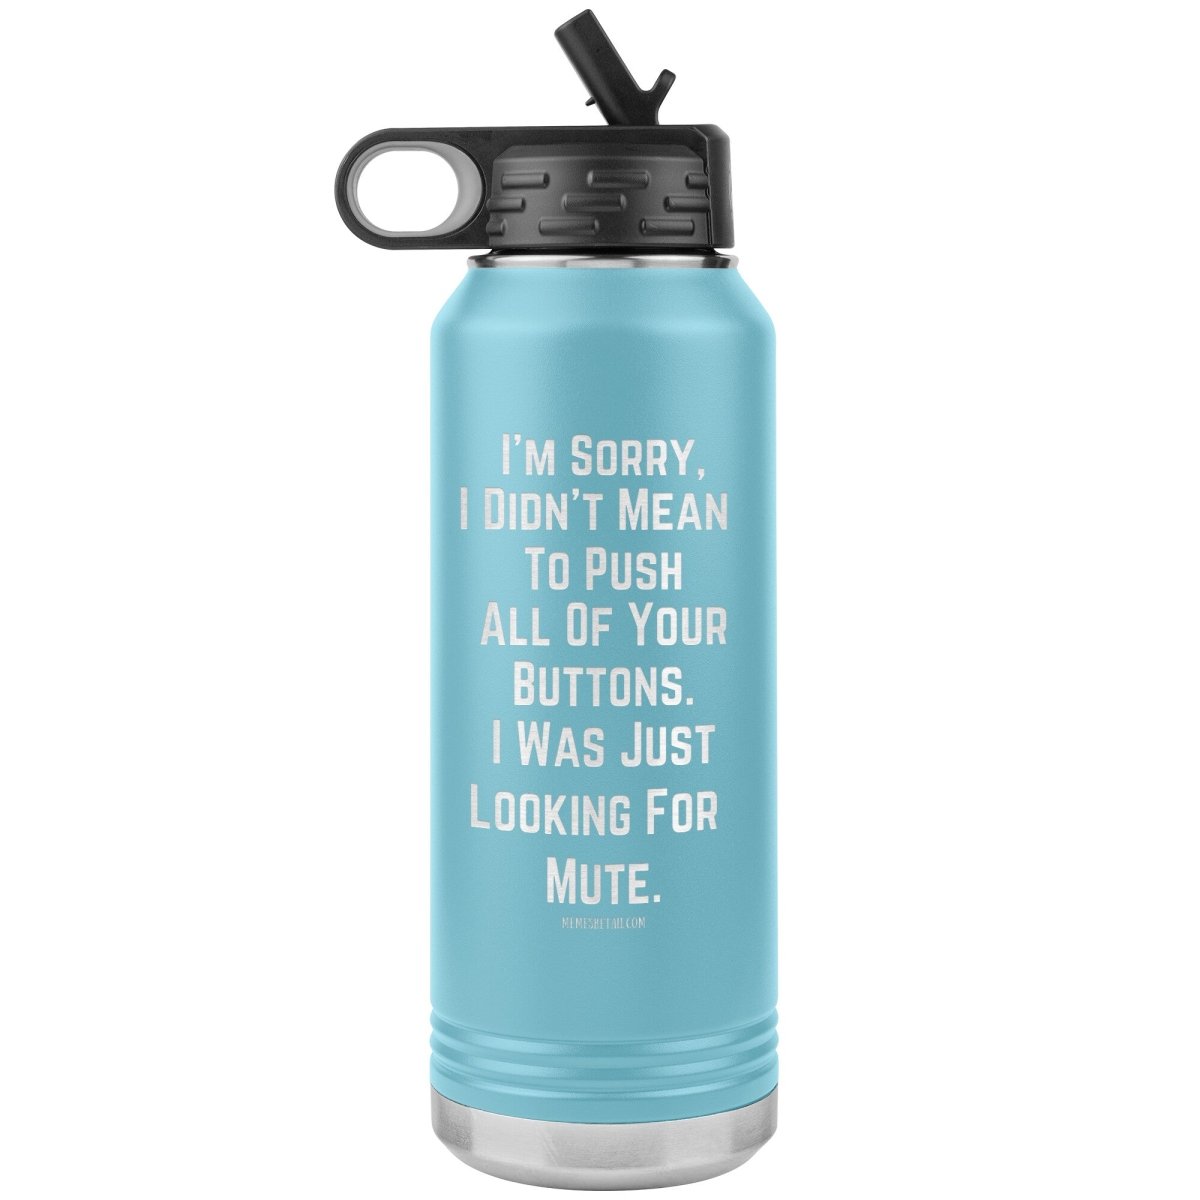 I’m sorry, I didn’t mean to push all your buttons, I was just looking for mute 32 oz water tumbler, Light Blue - MemesRetail.com